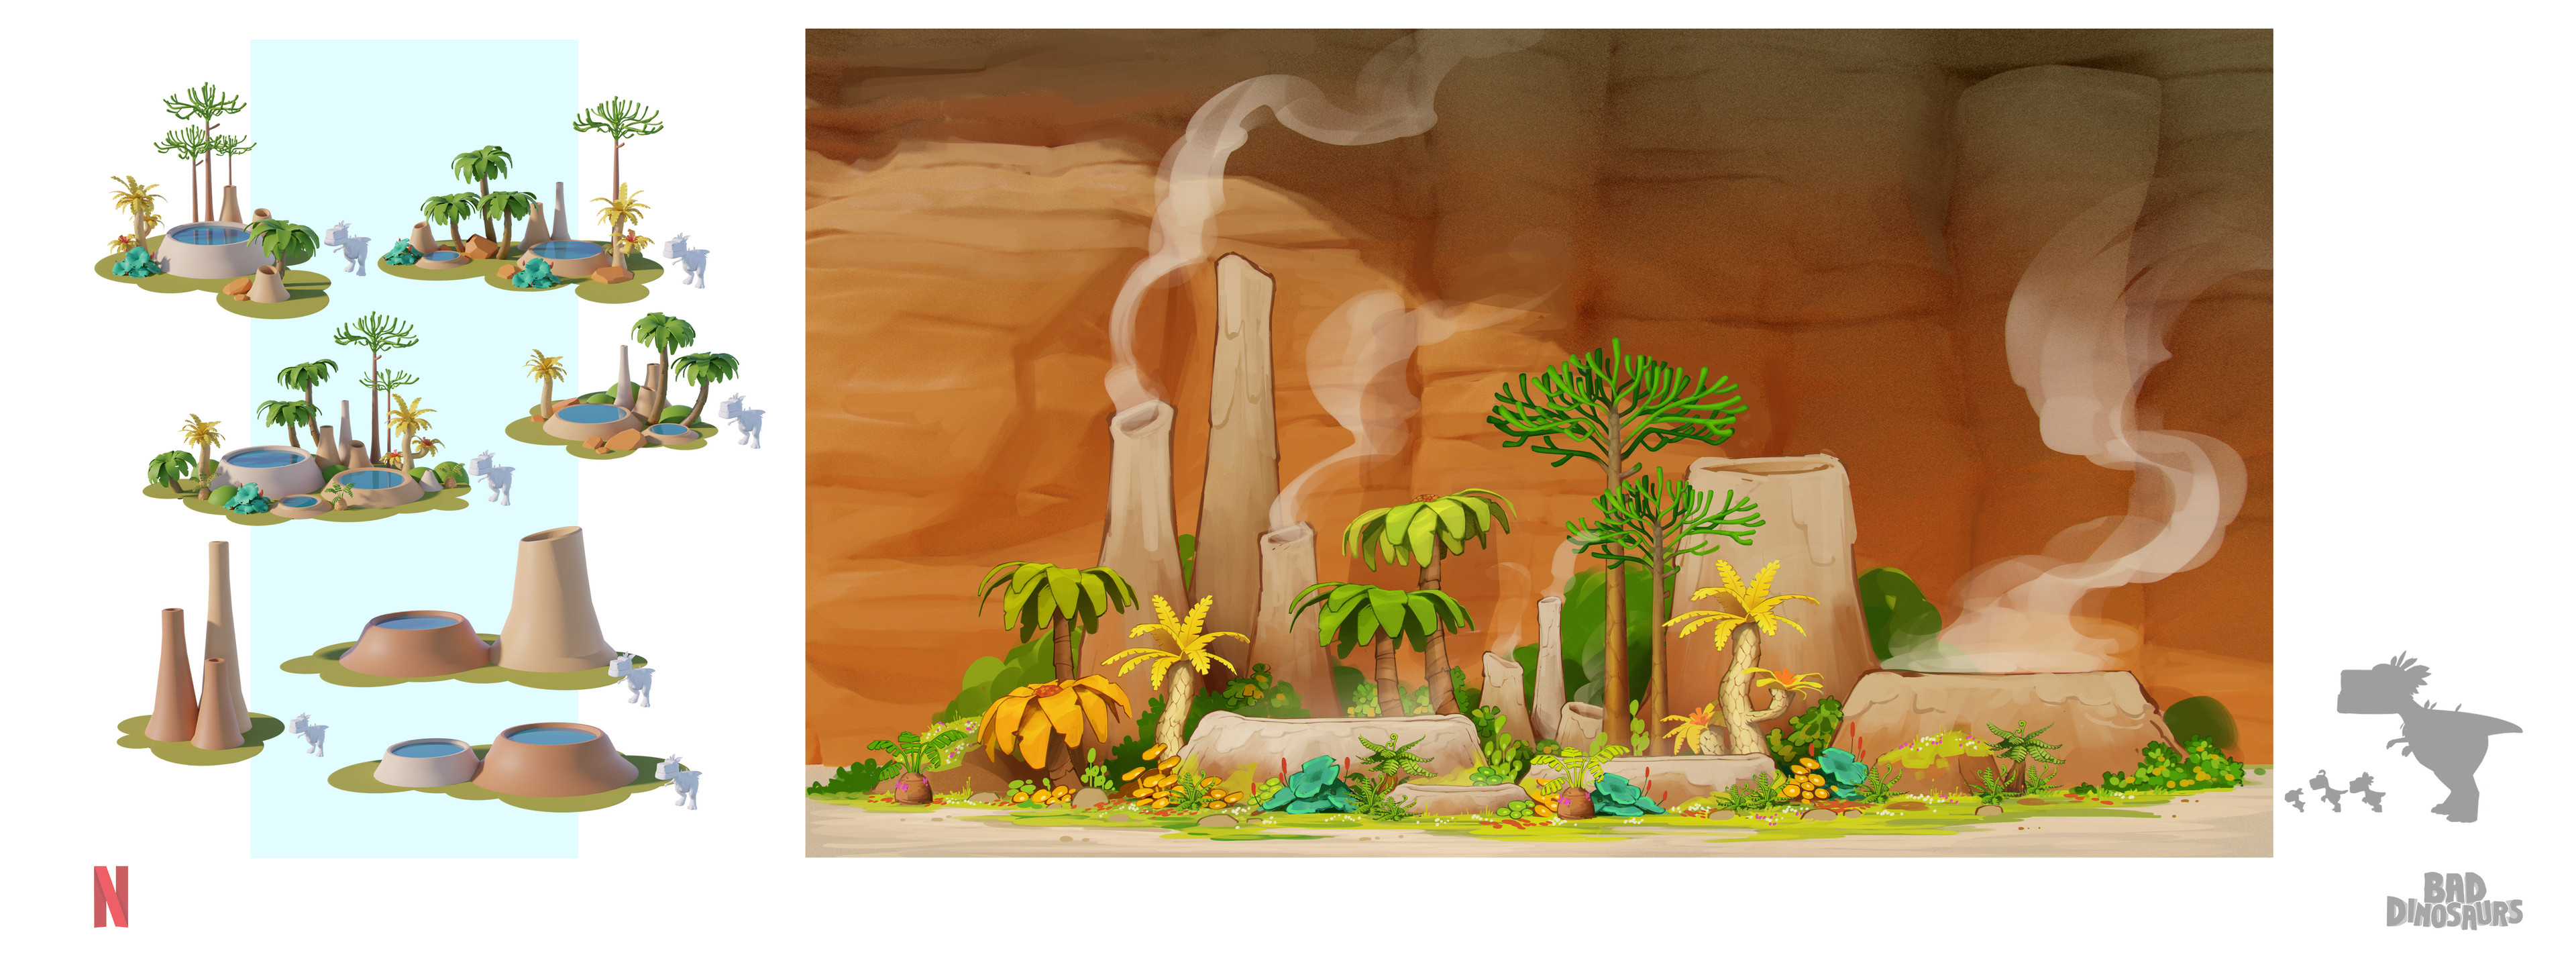 On the left, proxy vegetation "island" system I made to speed up the set dressing process.